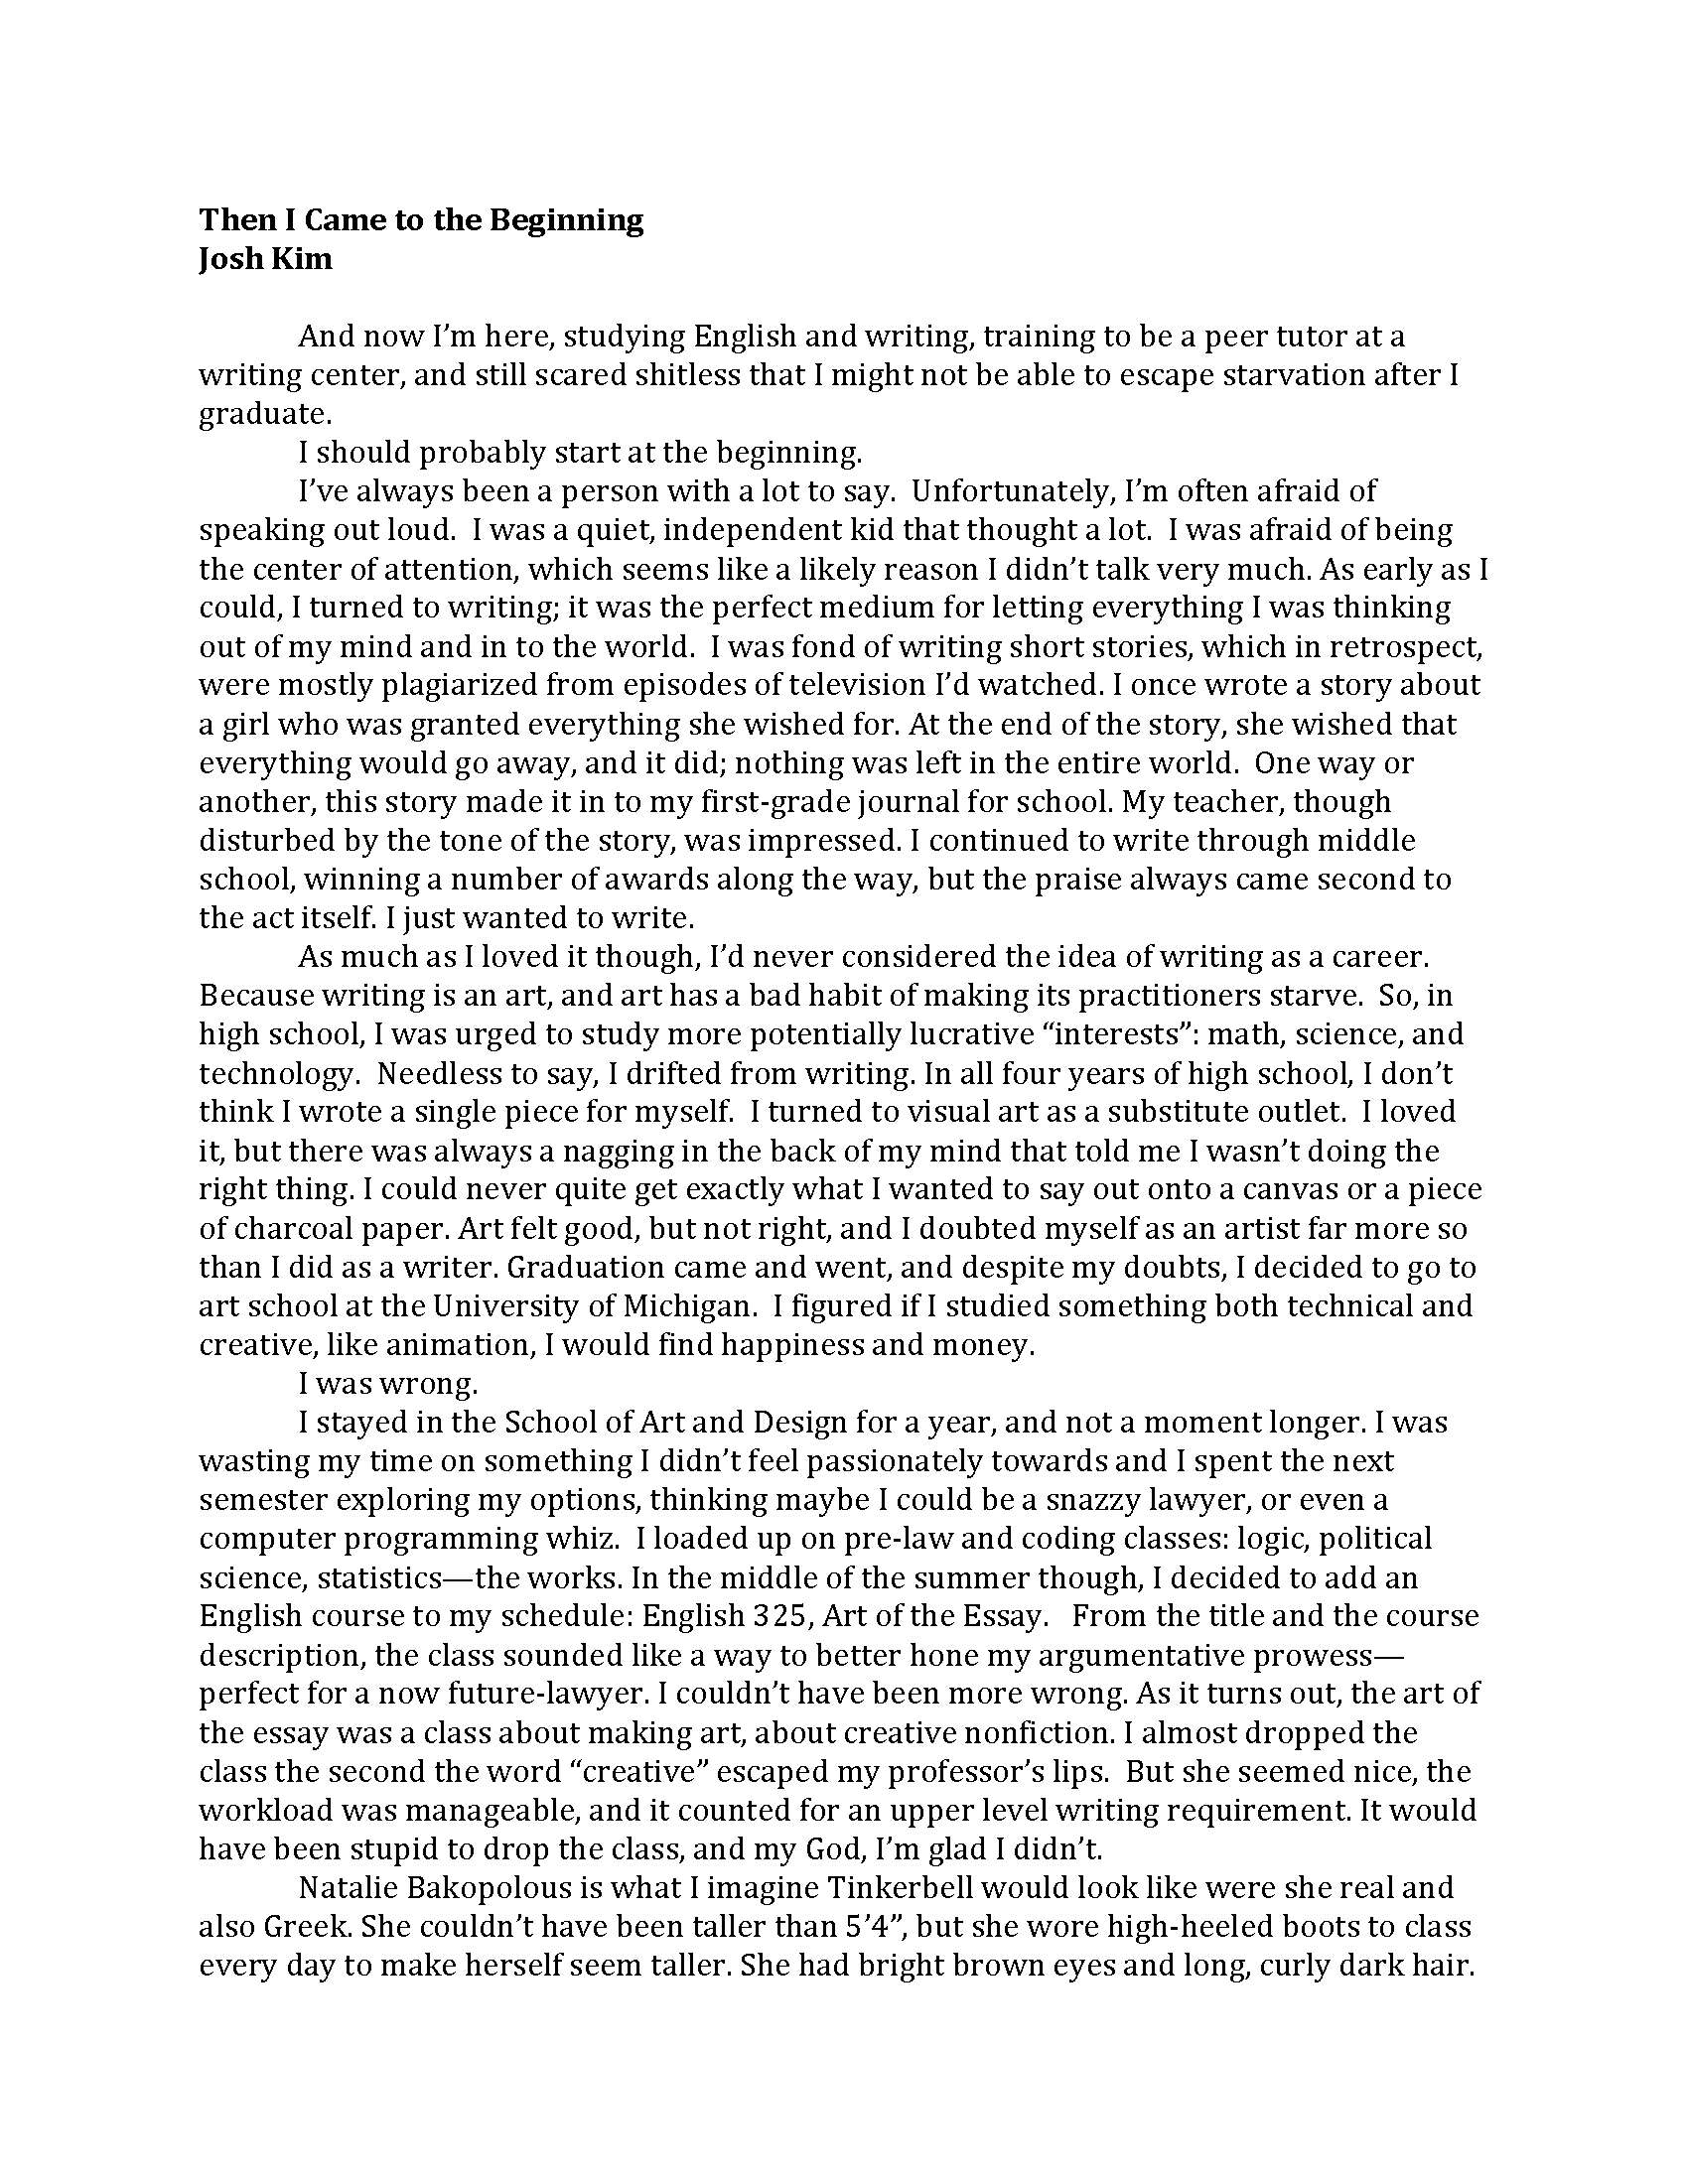 Essay About Myself as a Writer - Words | Help Me